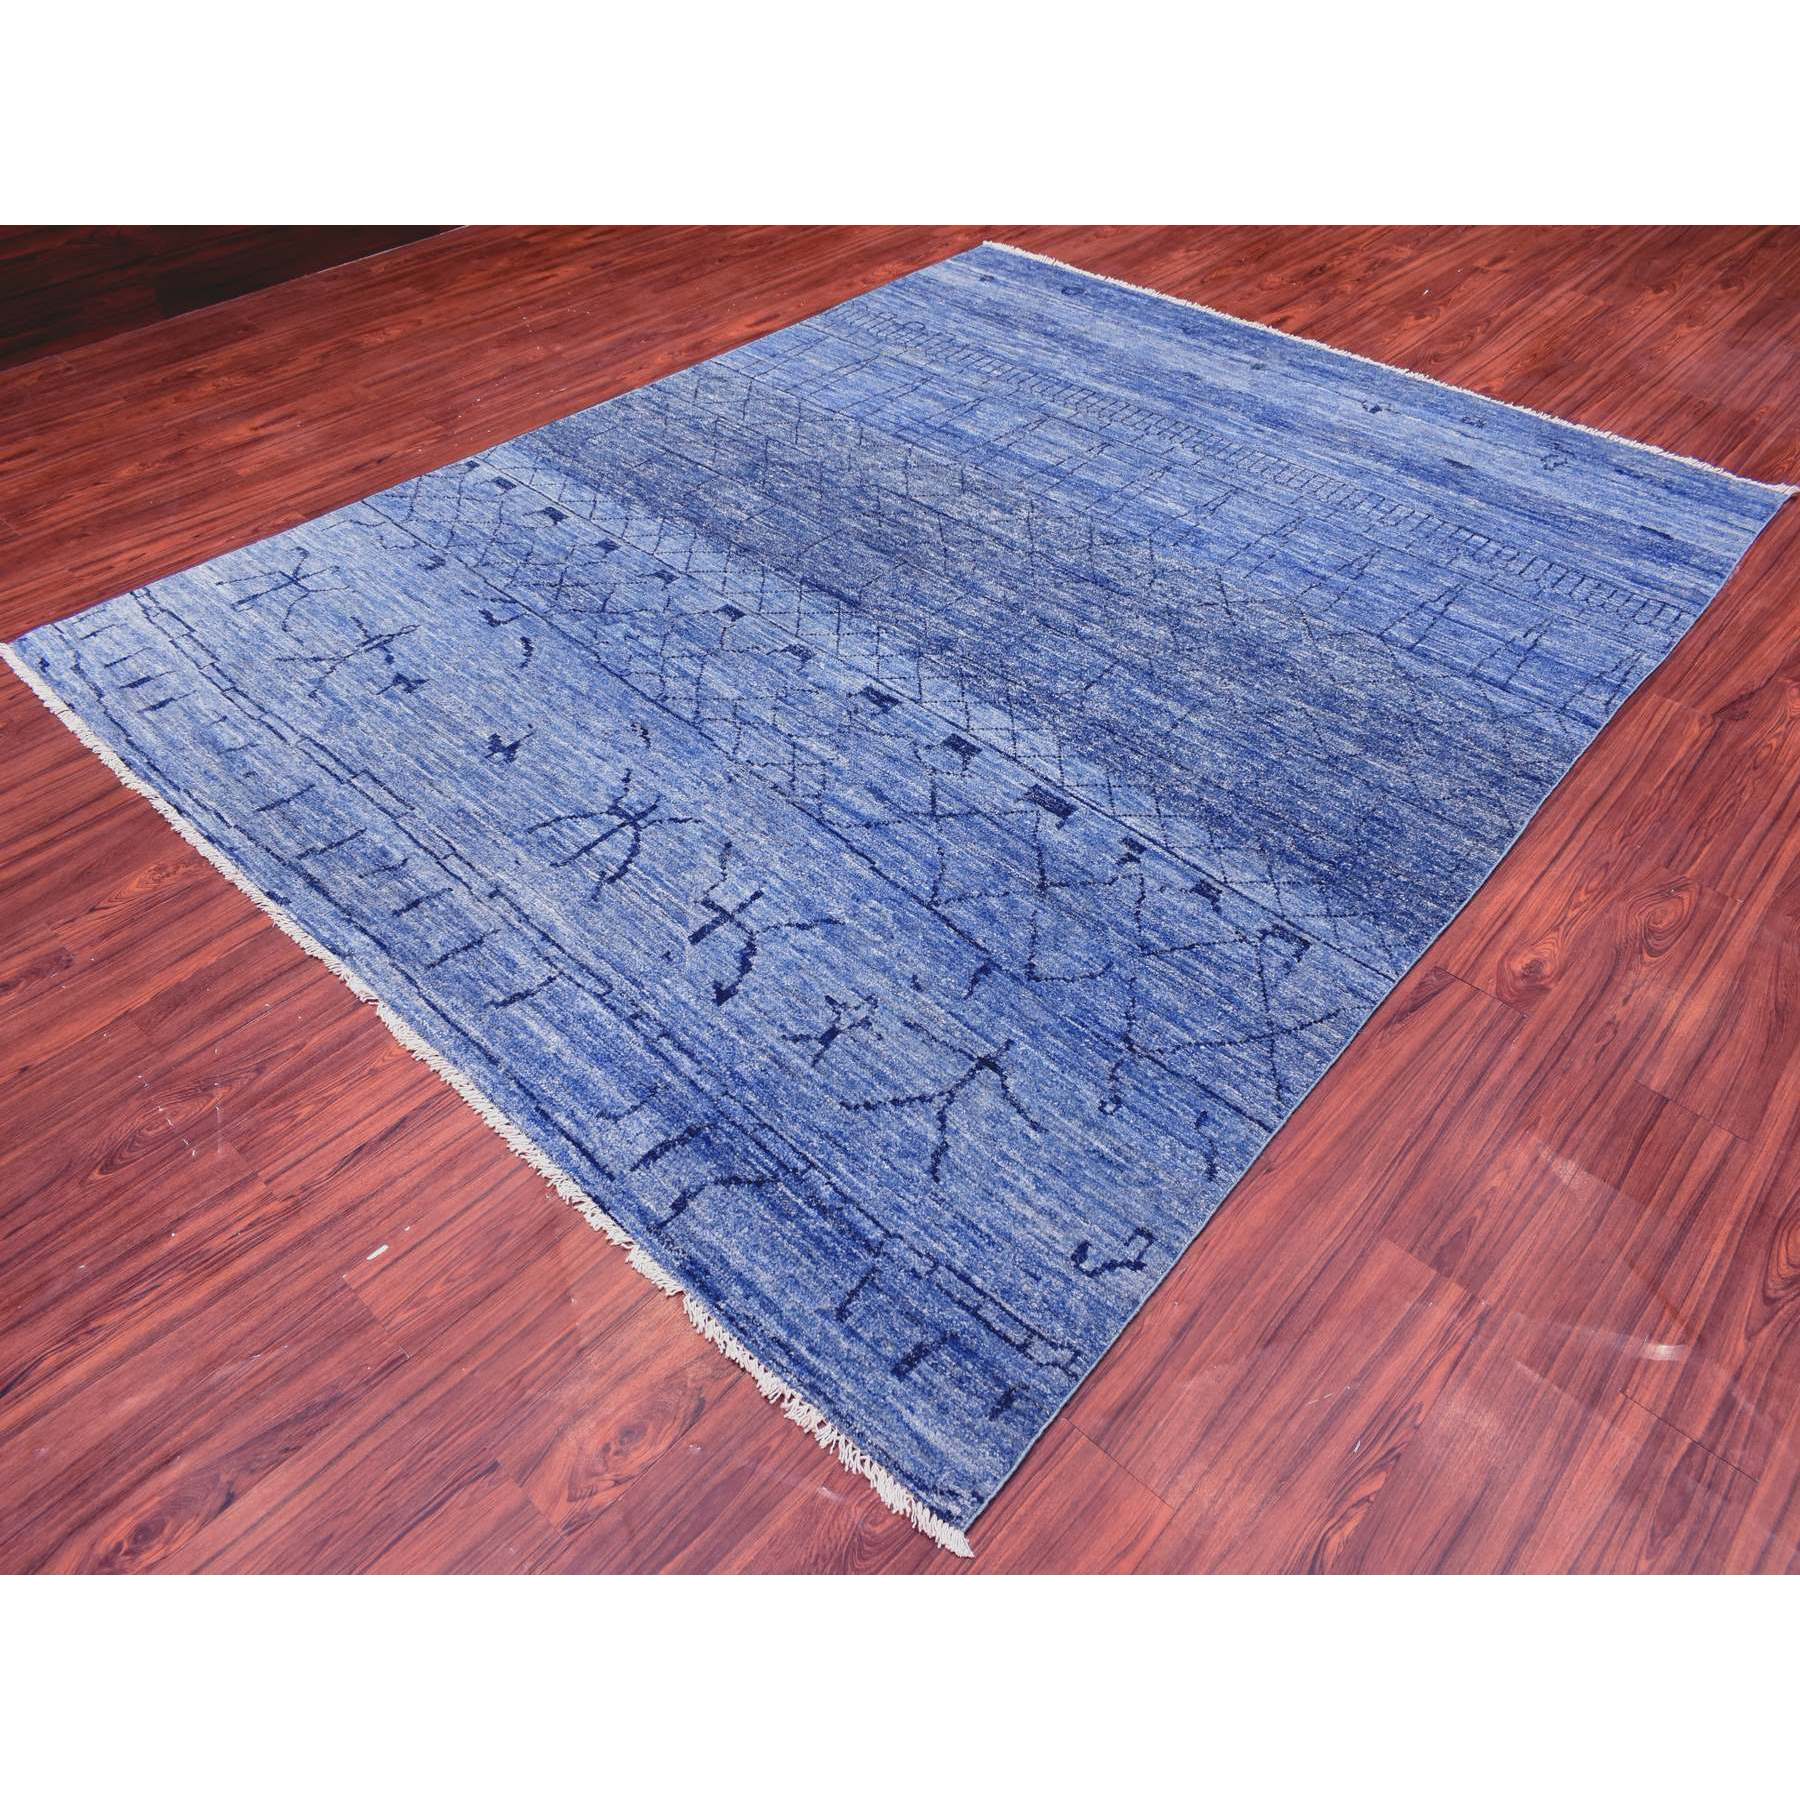 7'10"x9'9" Denim Blue, Boujaad Moroccan Berber Design with Criss Cross Pattern Natural Dyes Extra Soft Wool Hand Woven, Oriental Rug 